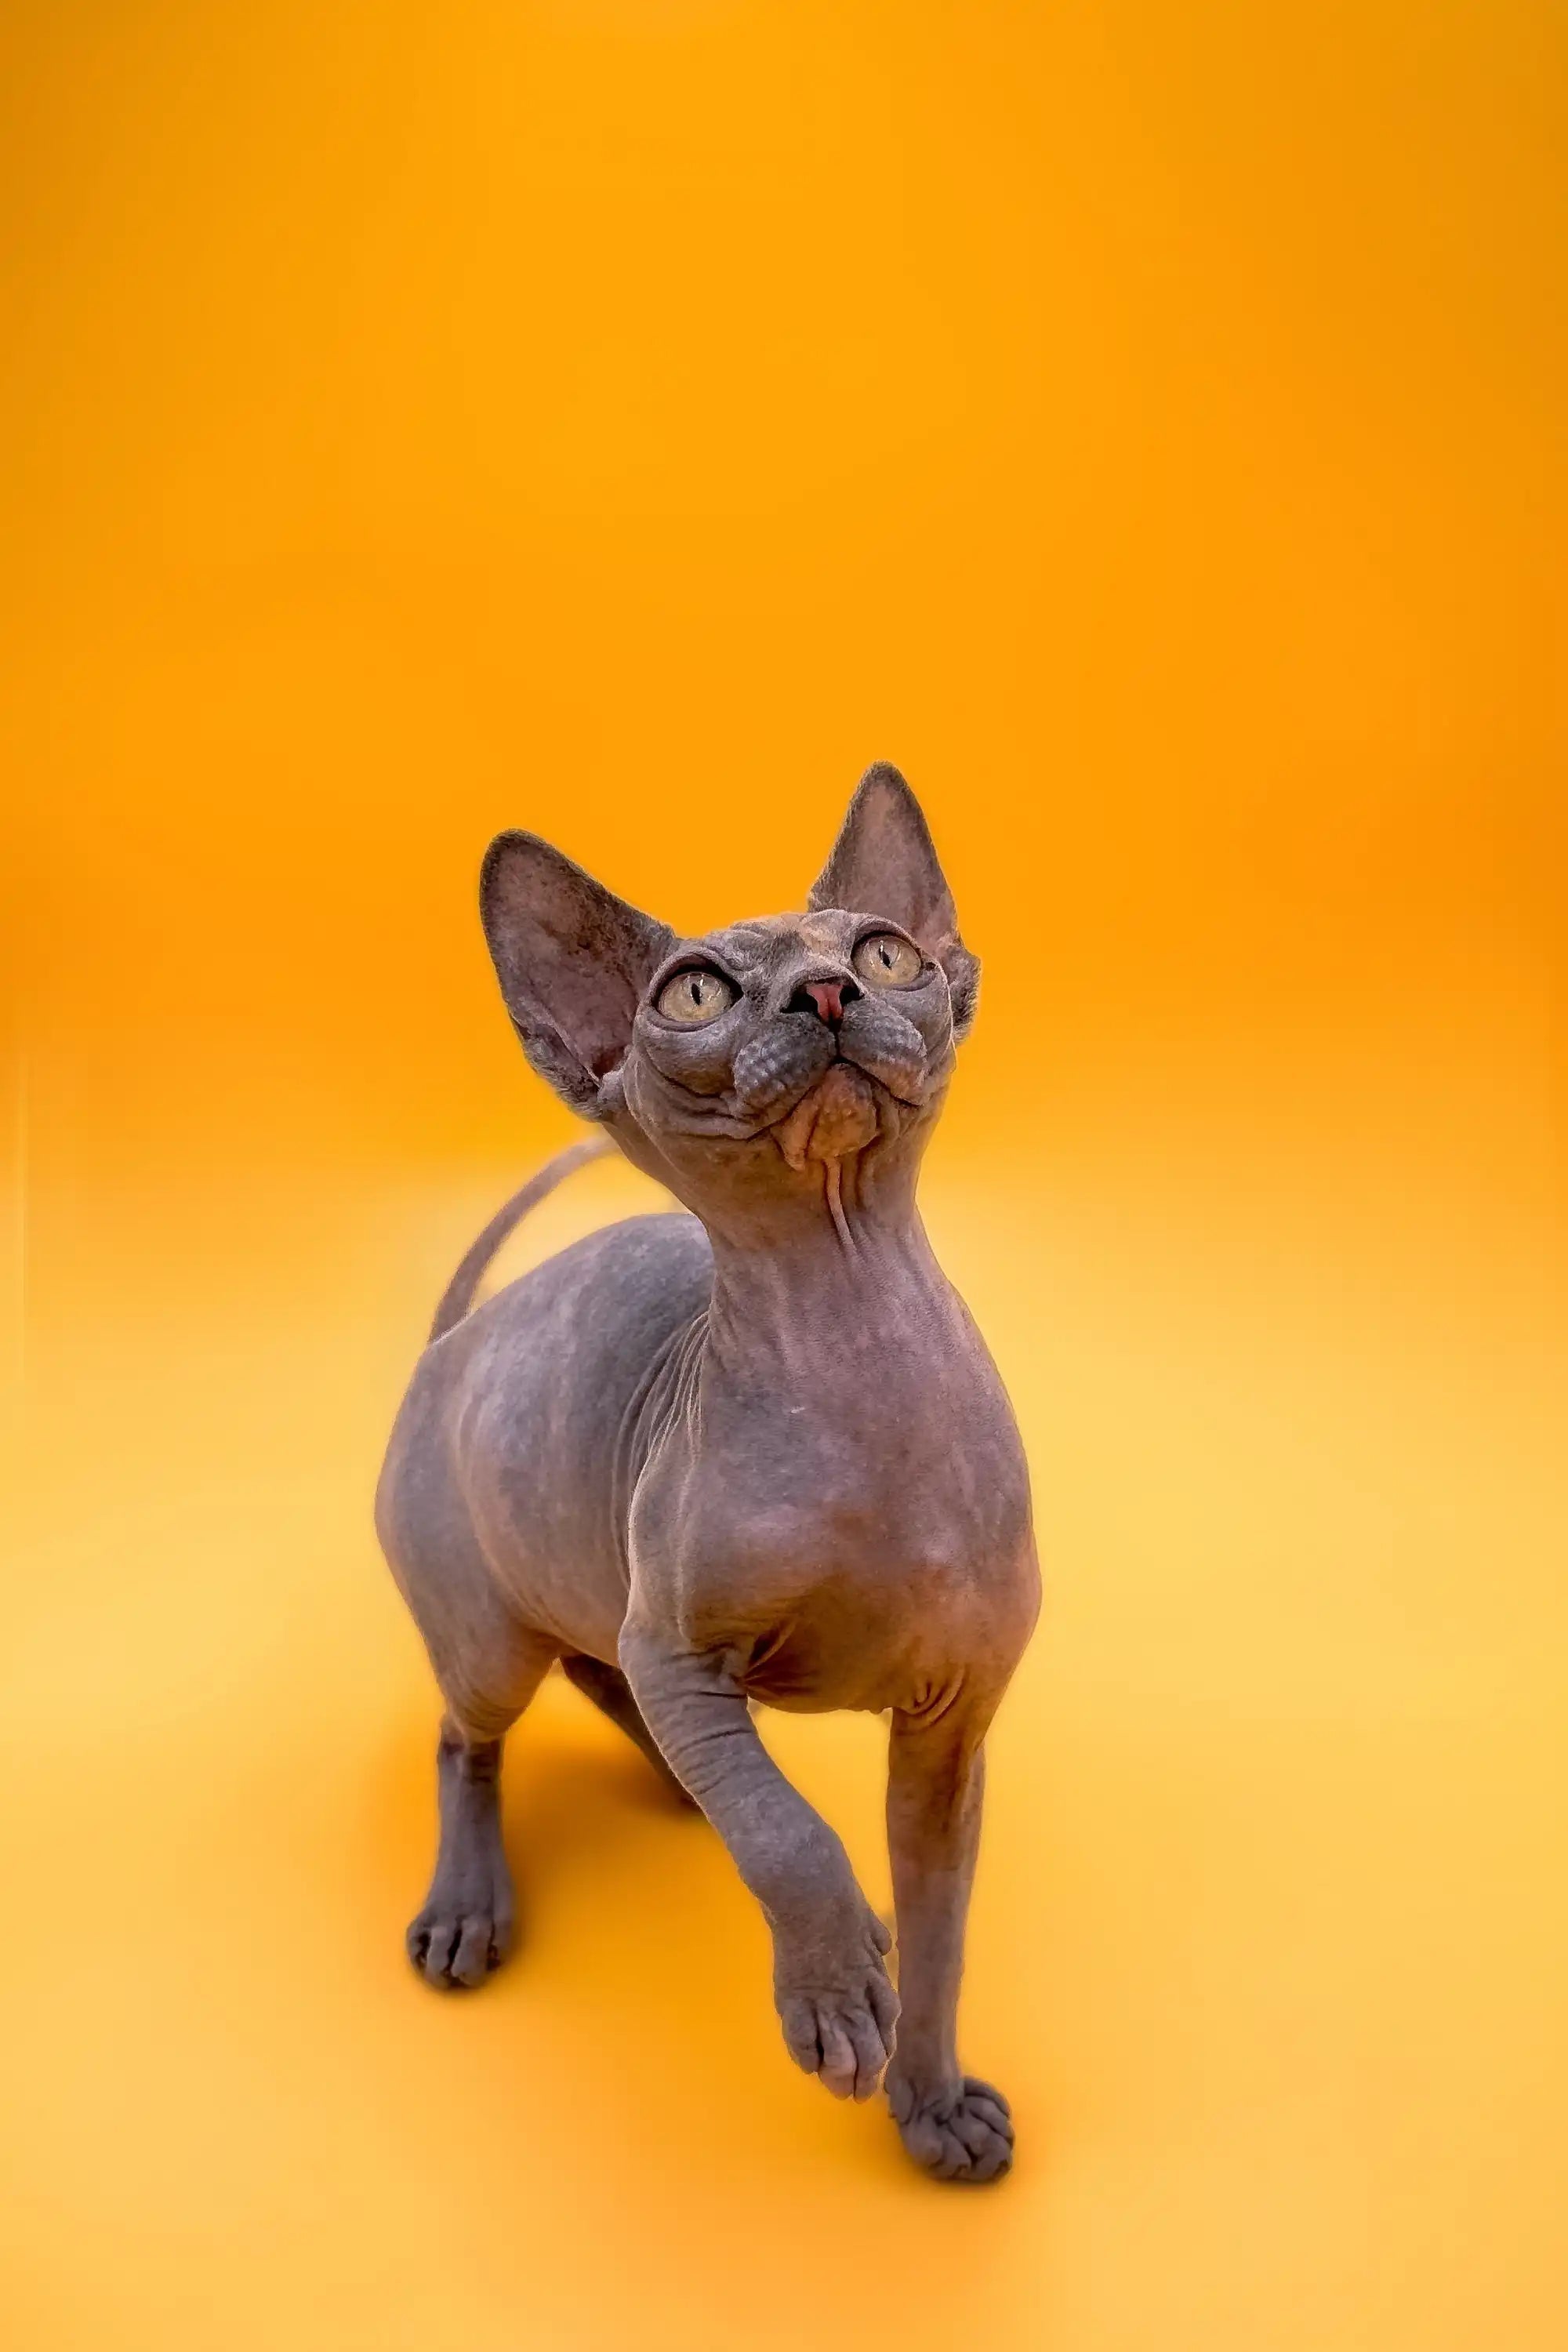 Sphynx Cats and Kittens for Sale Mirand | Kitten